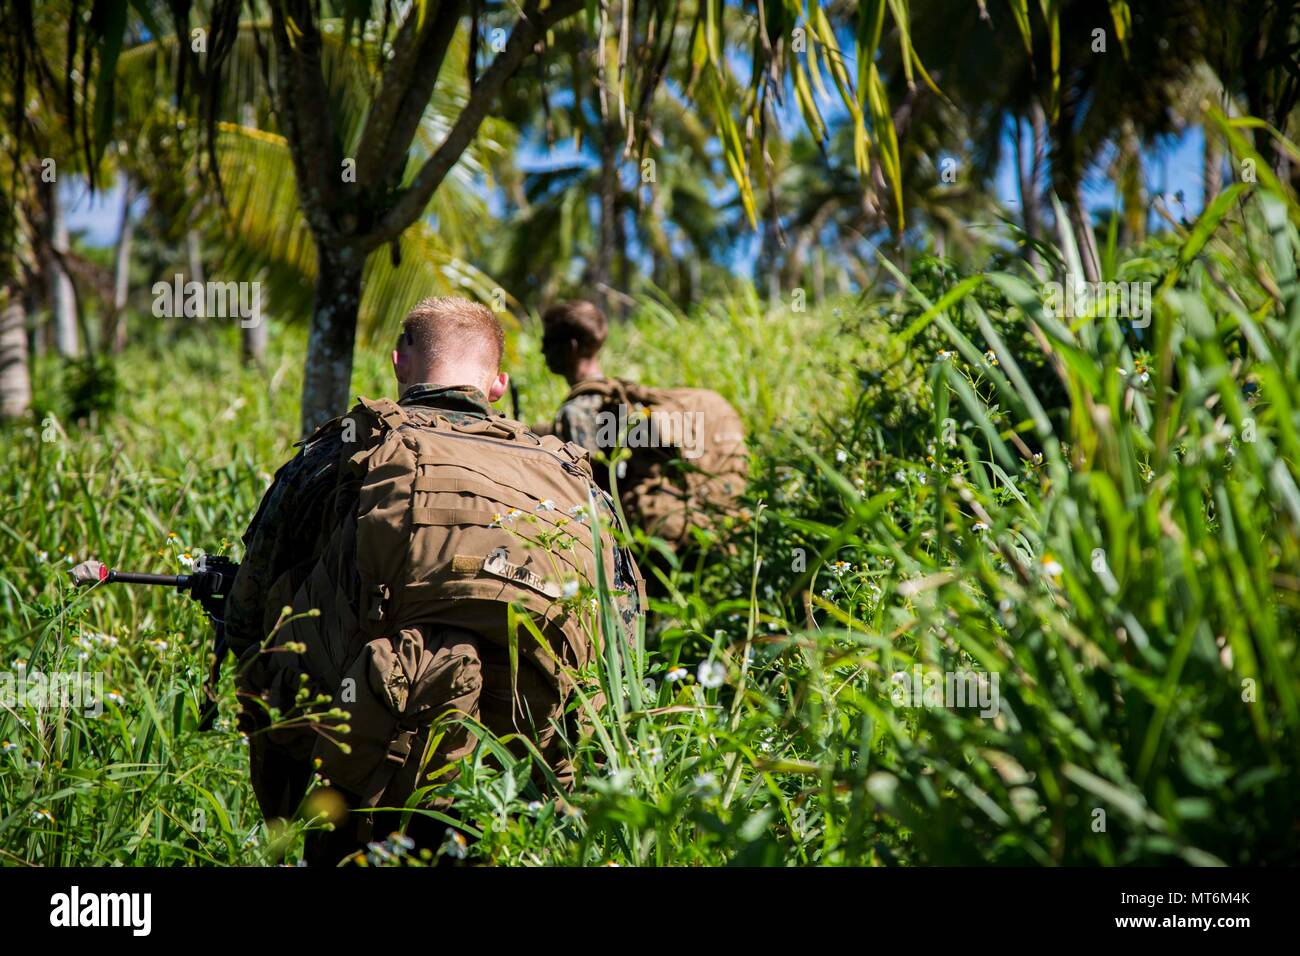 U.S. Marines with 3rd Battalion 4th Marines attached to Task Force Koa Moana 17, move to an objective during a joint service infantry training exercise as a part of Exercise TAFAKULA on Vava’u Island, Tonga, July 25, 2017. Exercise TAFAKULA is designed to strengthen the military-to-military, and community relations between Tonga’s His Majesty’s Armed Forces, French Army of New Caledonia, New Zealand Defense Force, and the United States Armed Forces.  (U.S. Marine Corps photo by MCIPAC Combat Camera Lance Cpl. Juan C. Bustos) Stock Photo